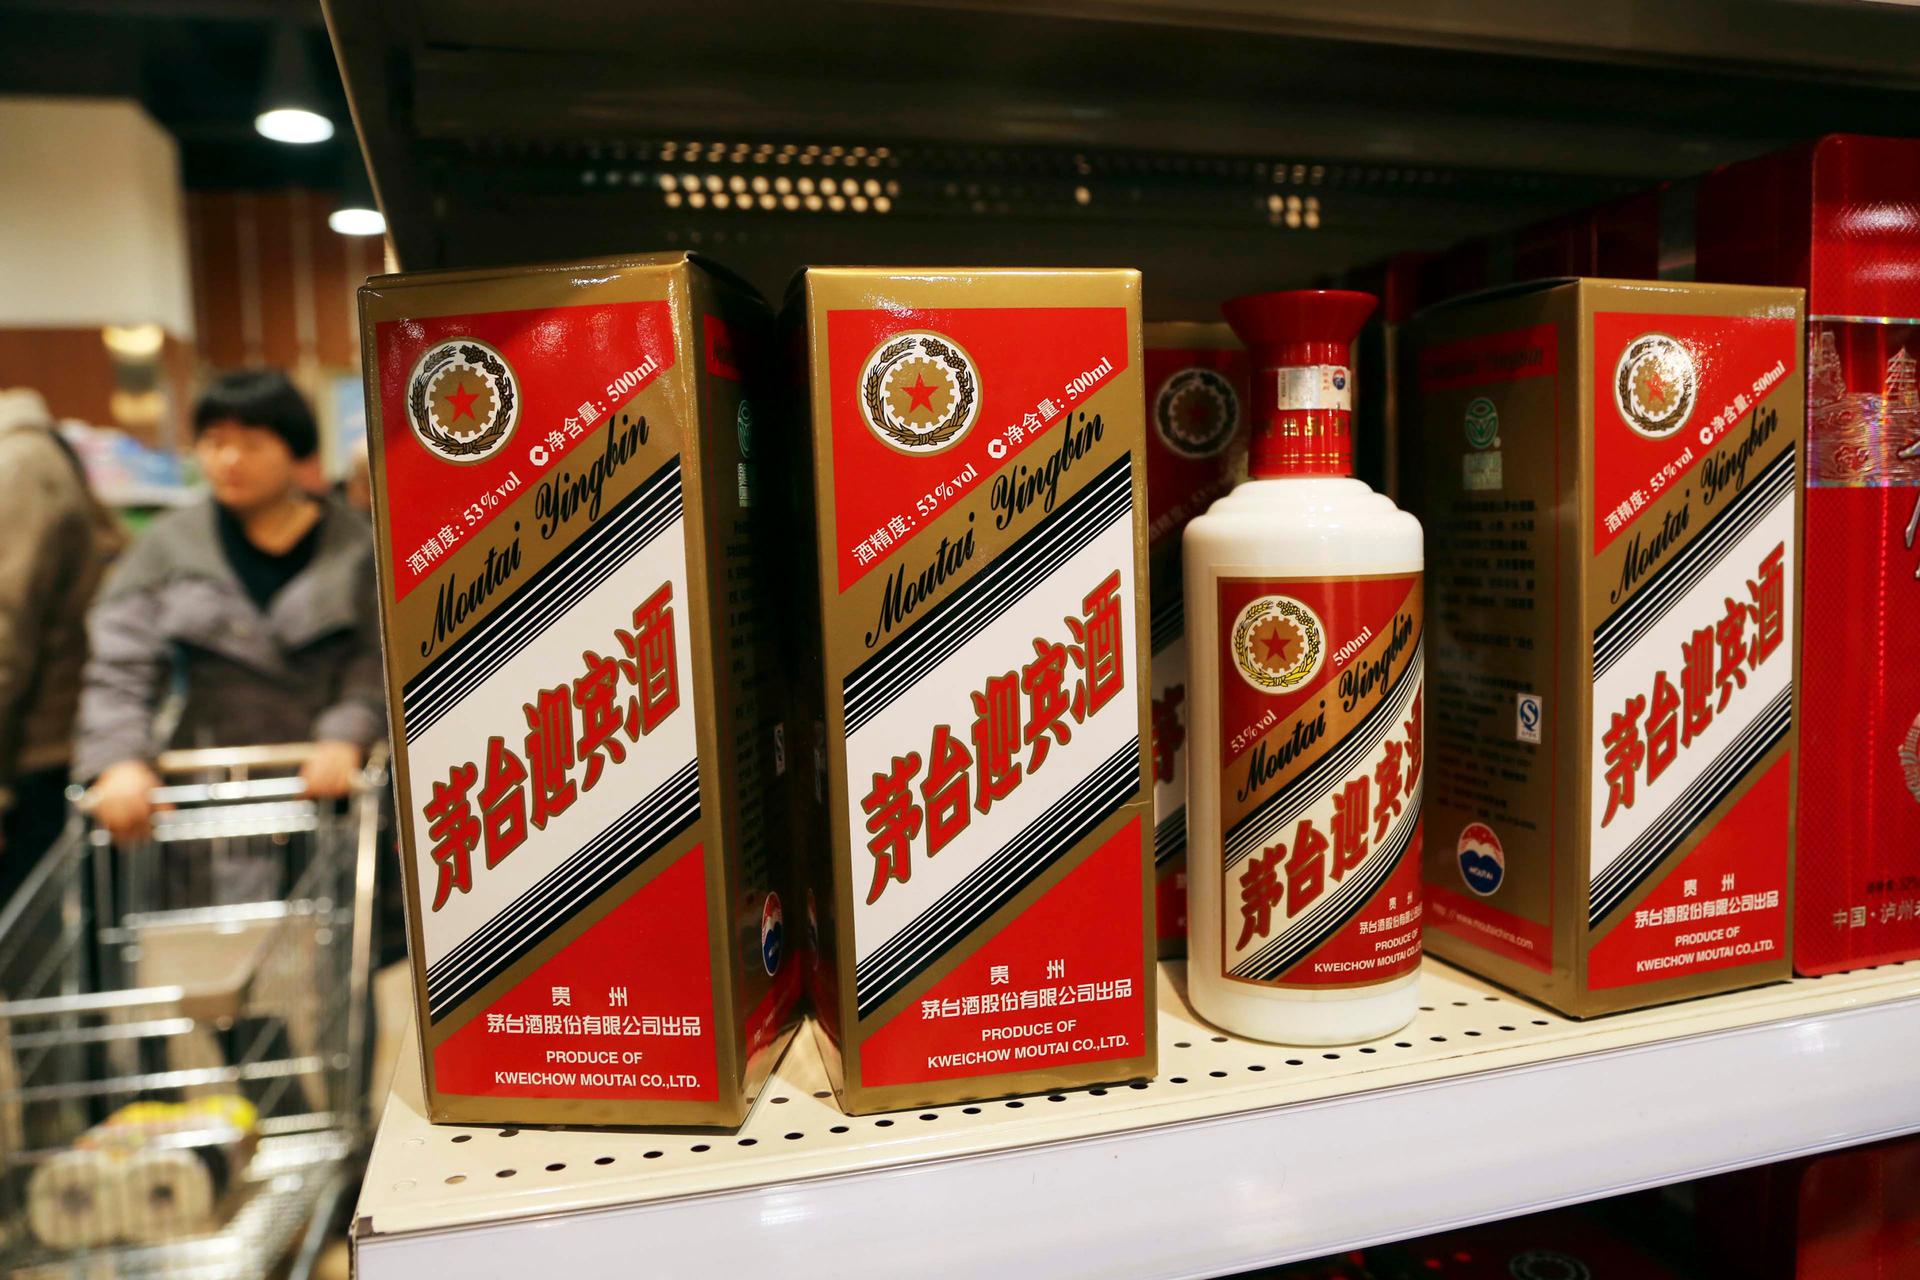 Bottles of Moutai baijiu on sale at a supermarket in Xuchang, China. Baijiu is a popular Chinese liquor distilled from fermented sorghum and rice.